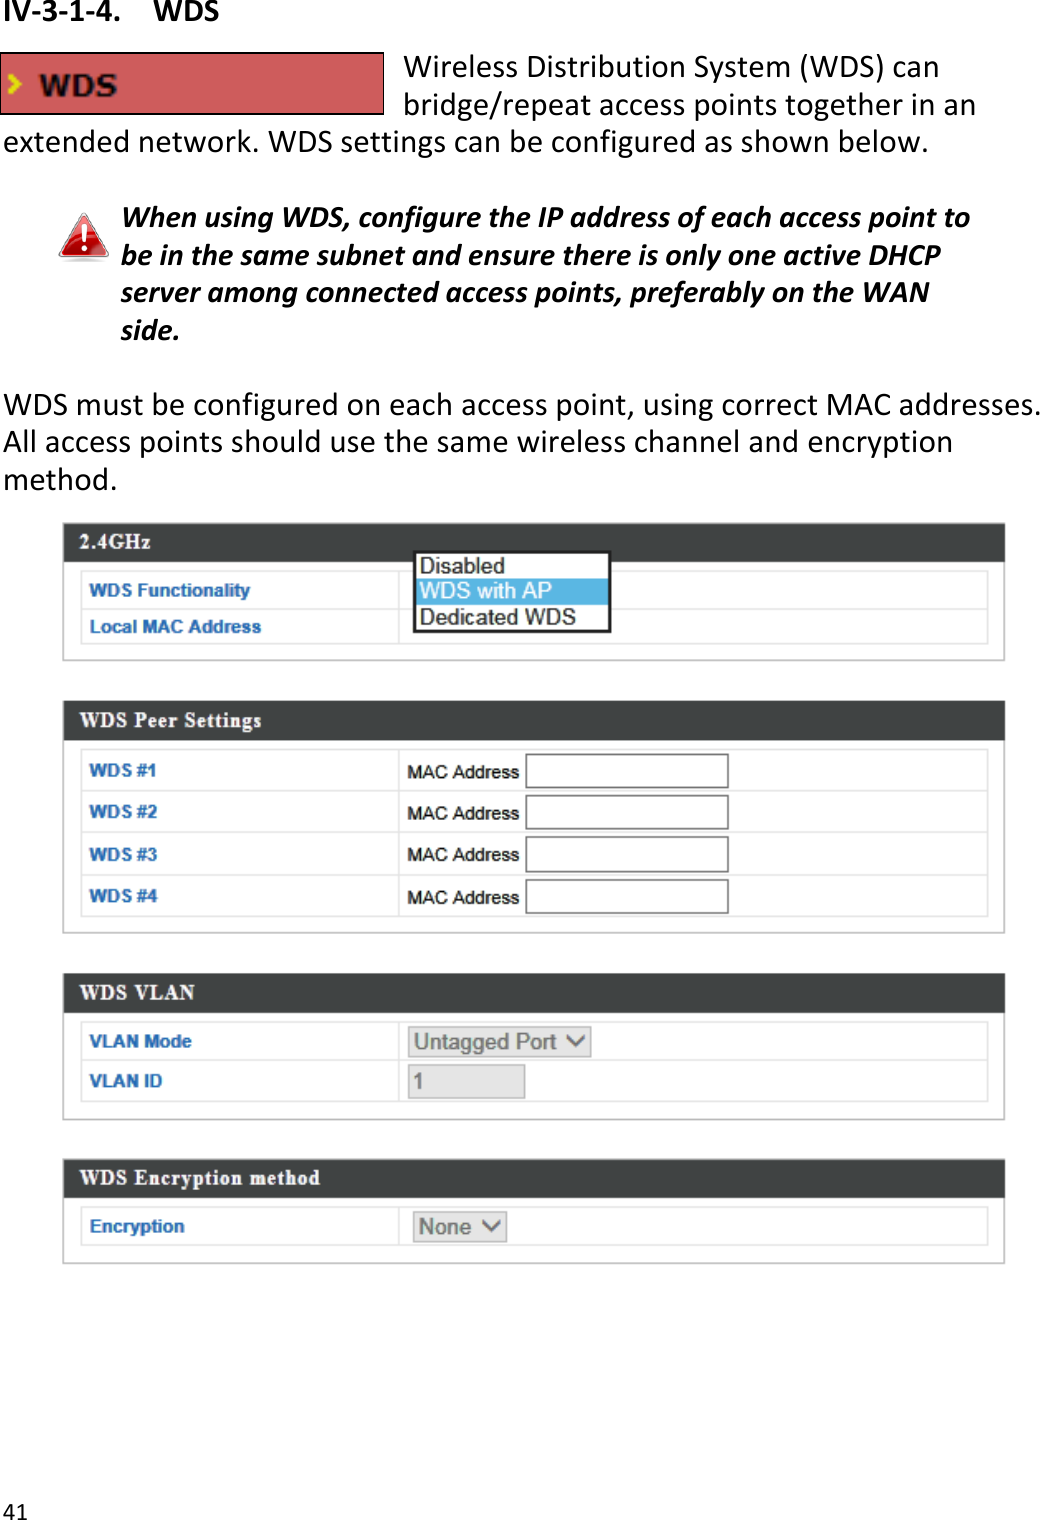 41  IV-3-1-4.  WDS Wireless Distribution System (WDS) can bridge/repeat access points together in an extended network. WDS settings can be configured as shown below.  When using WDS, configure the IP address of each access point to be in the same subnet and ensure there is only one active DHCP server among connected access points, preferably on the WAN side.  WDS must be configured on each access point, using correct MAC addresses. All access points should use the same wireless channel and encryption method.  